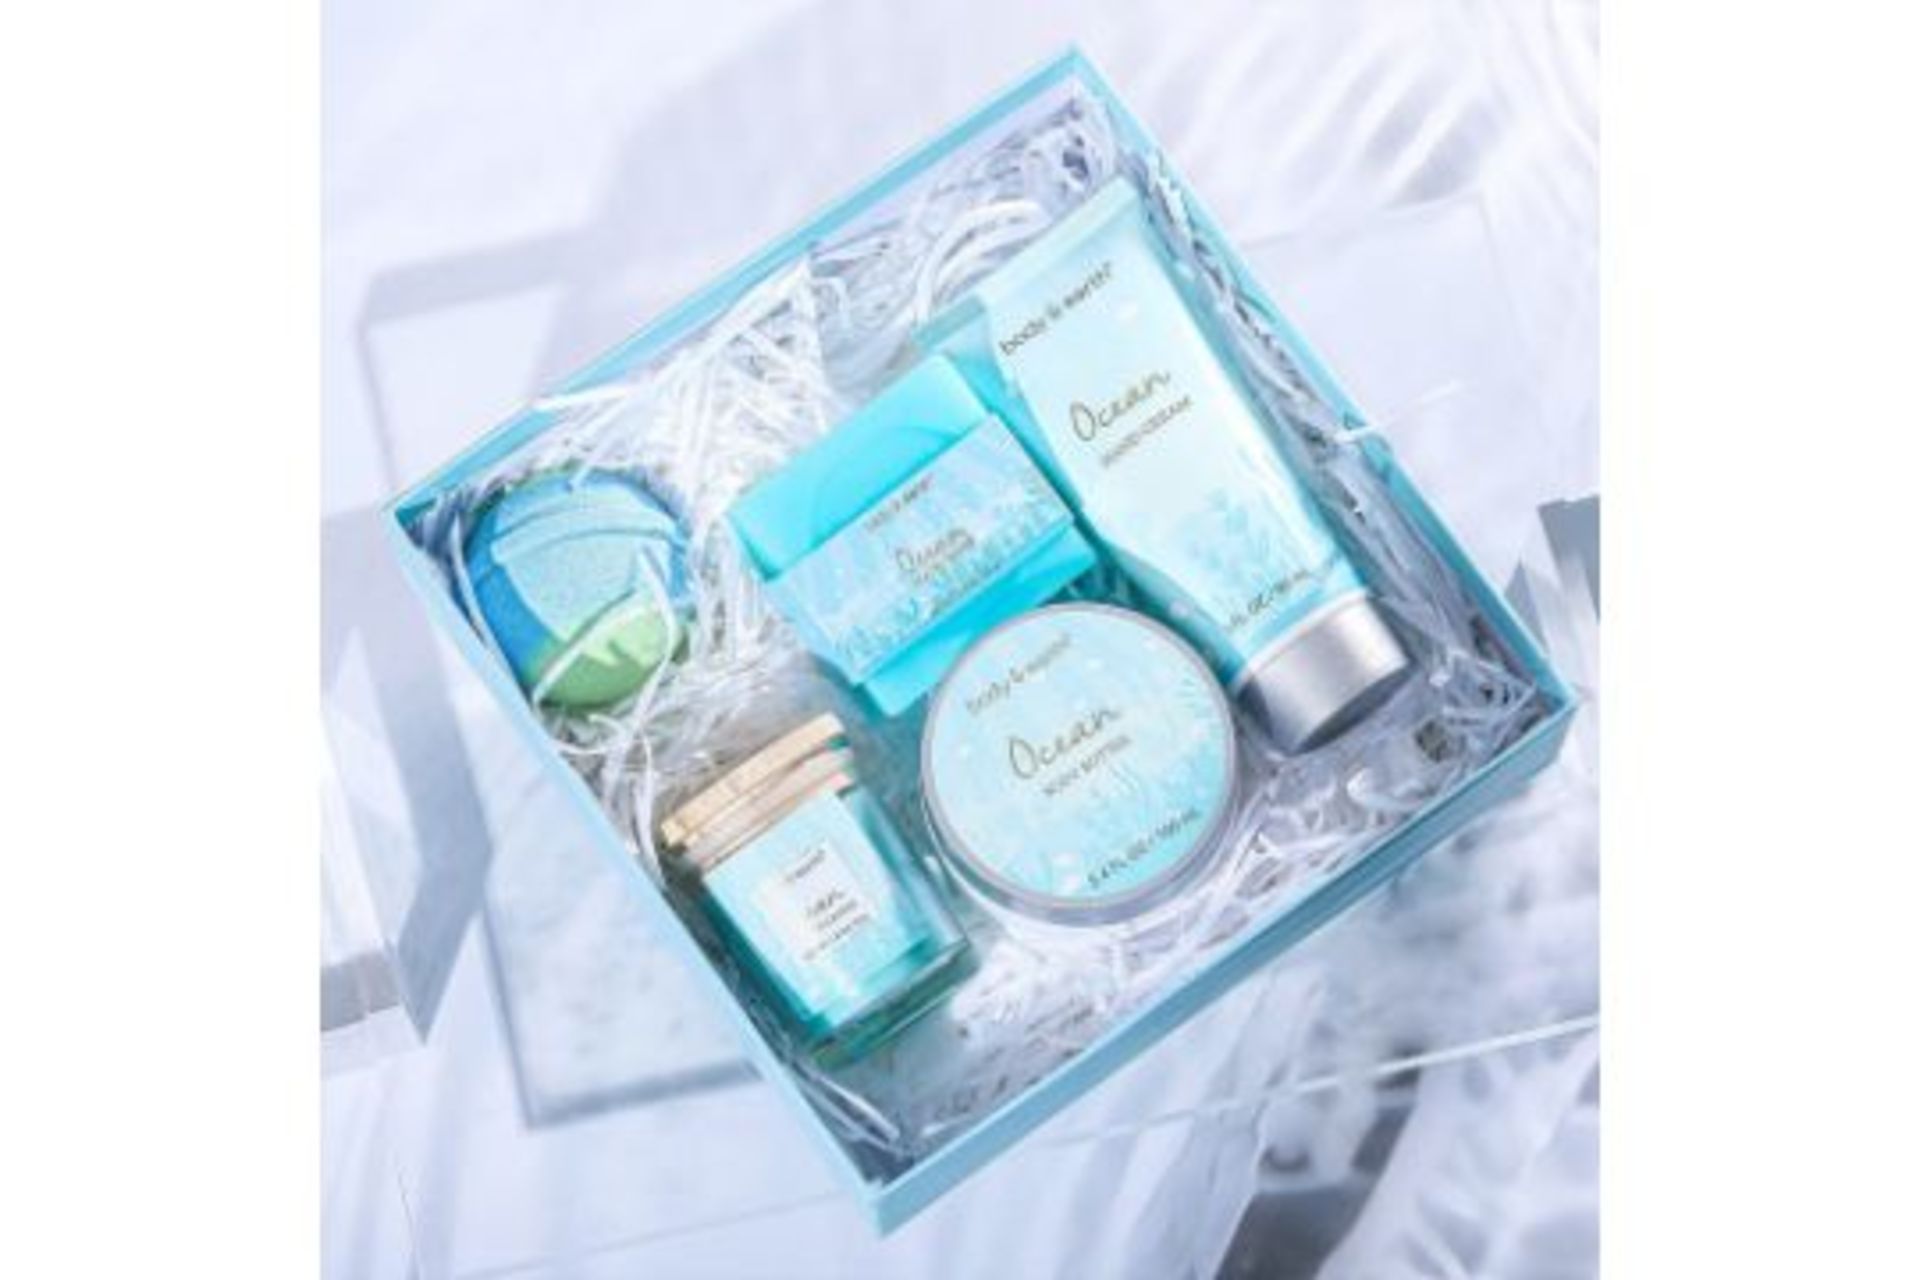 PALLET TO CONTAIN 120 x NEW BOXED BODY & EARTH OCEAN 5 PIECE GIFT SETS. EACH SET INCLUDES: BATH - Image 2 of 2